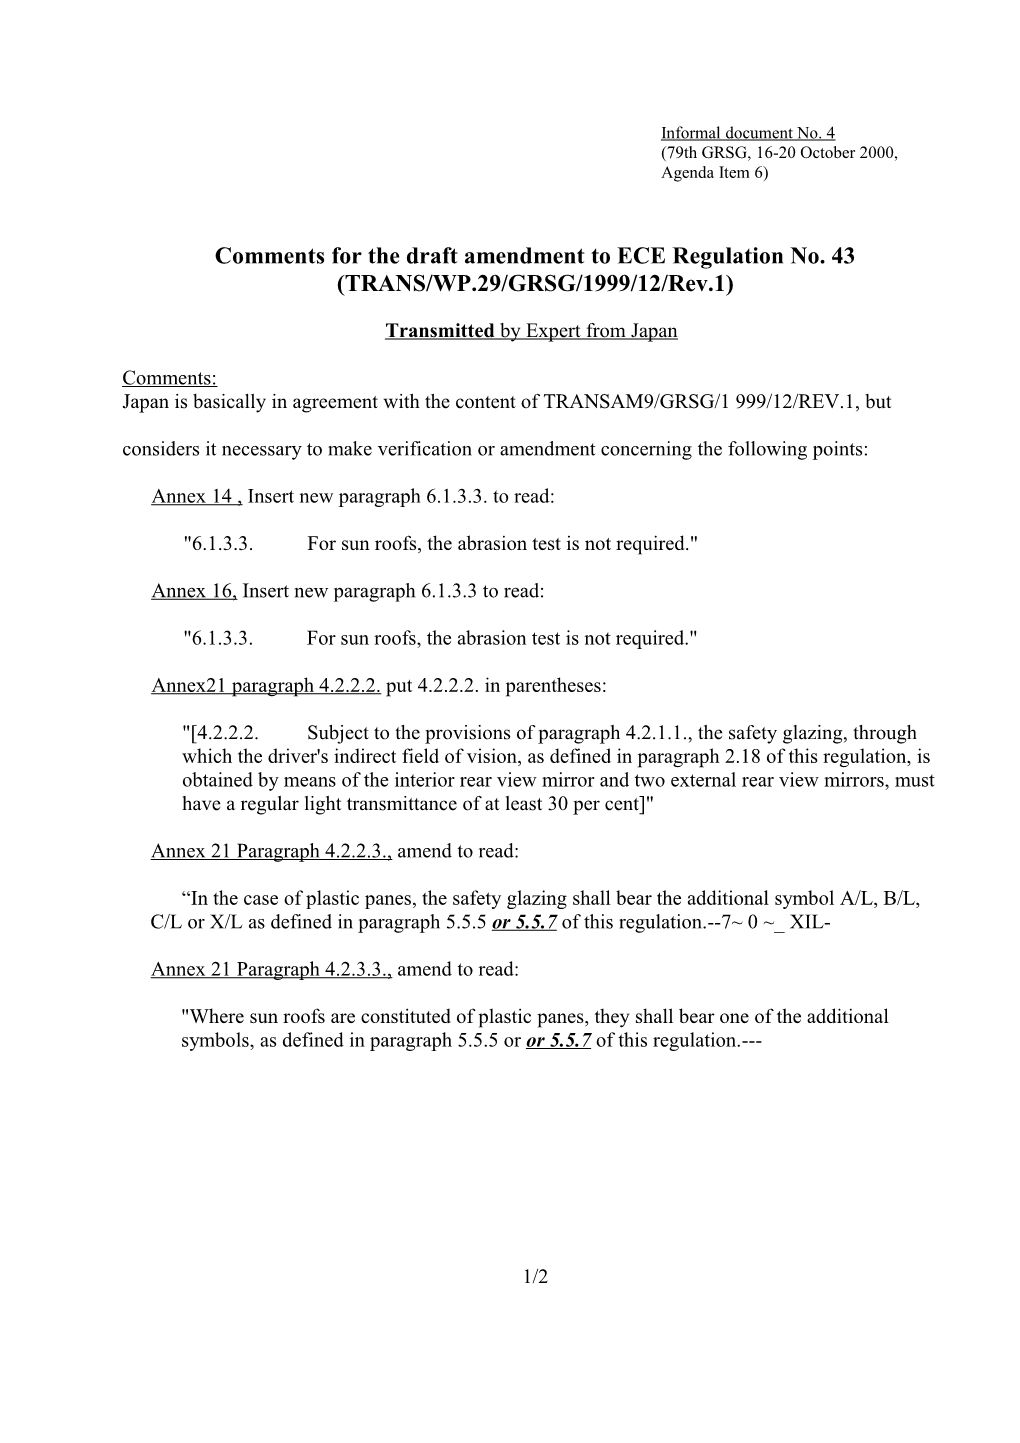 Comments for the Draft Amendment to ECE Regulation No. 43